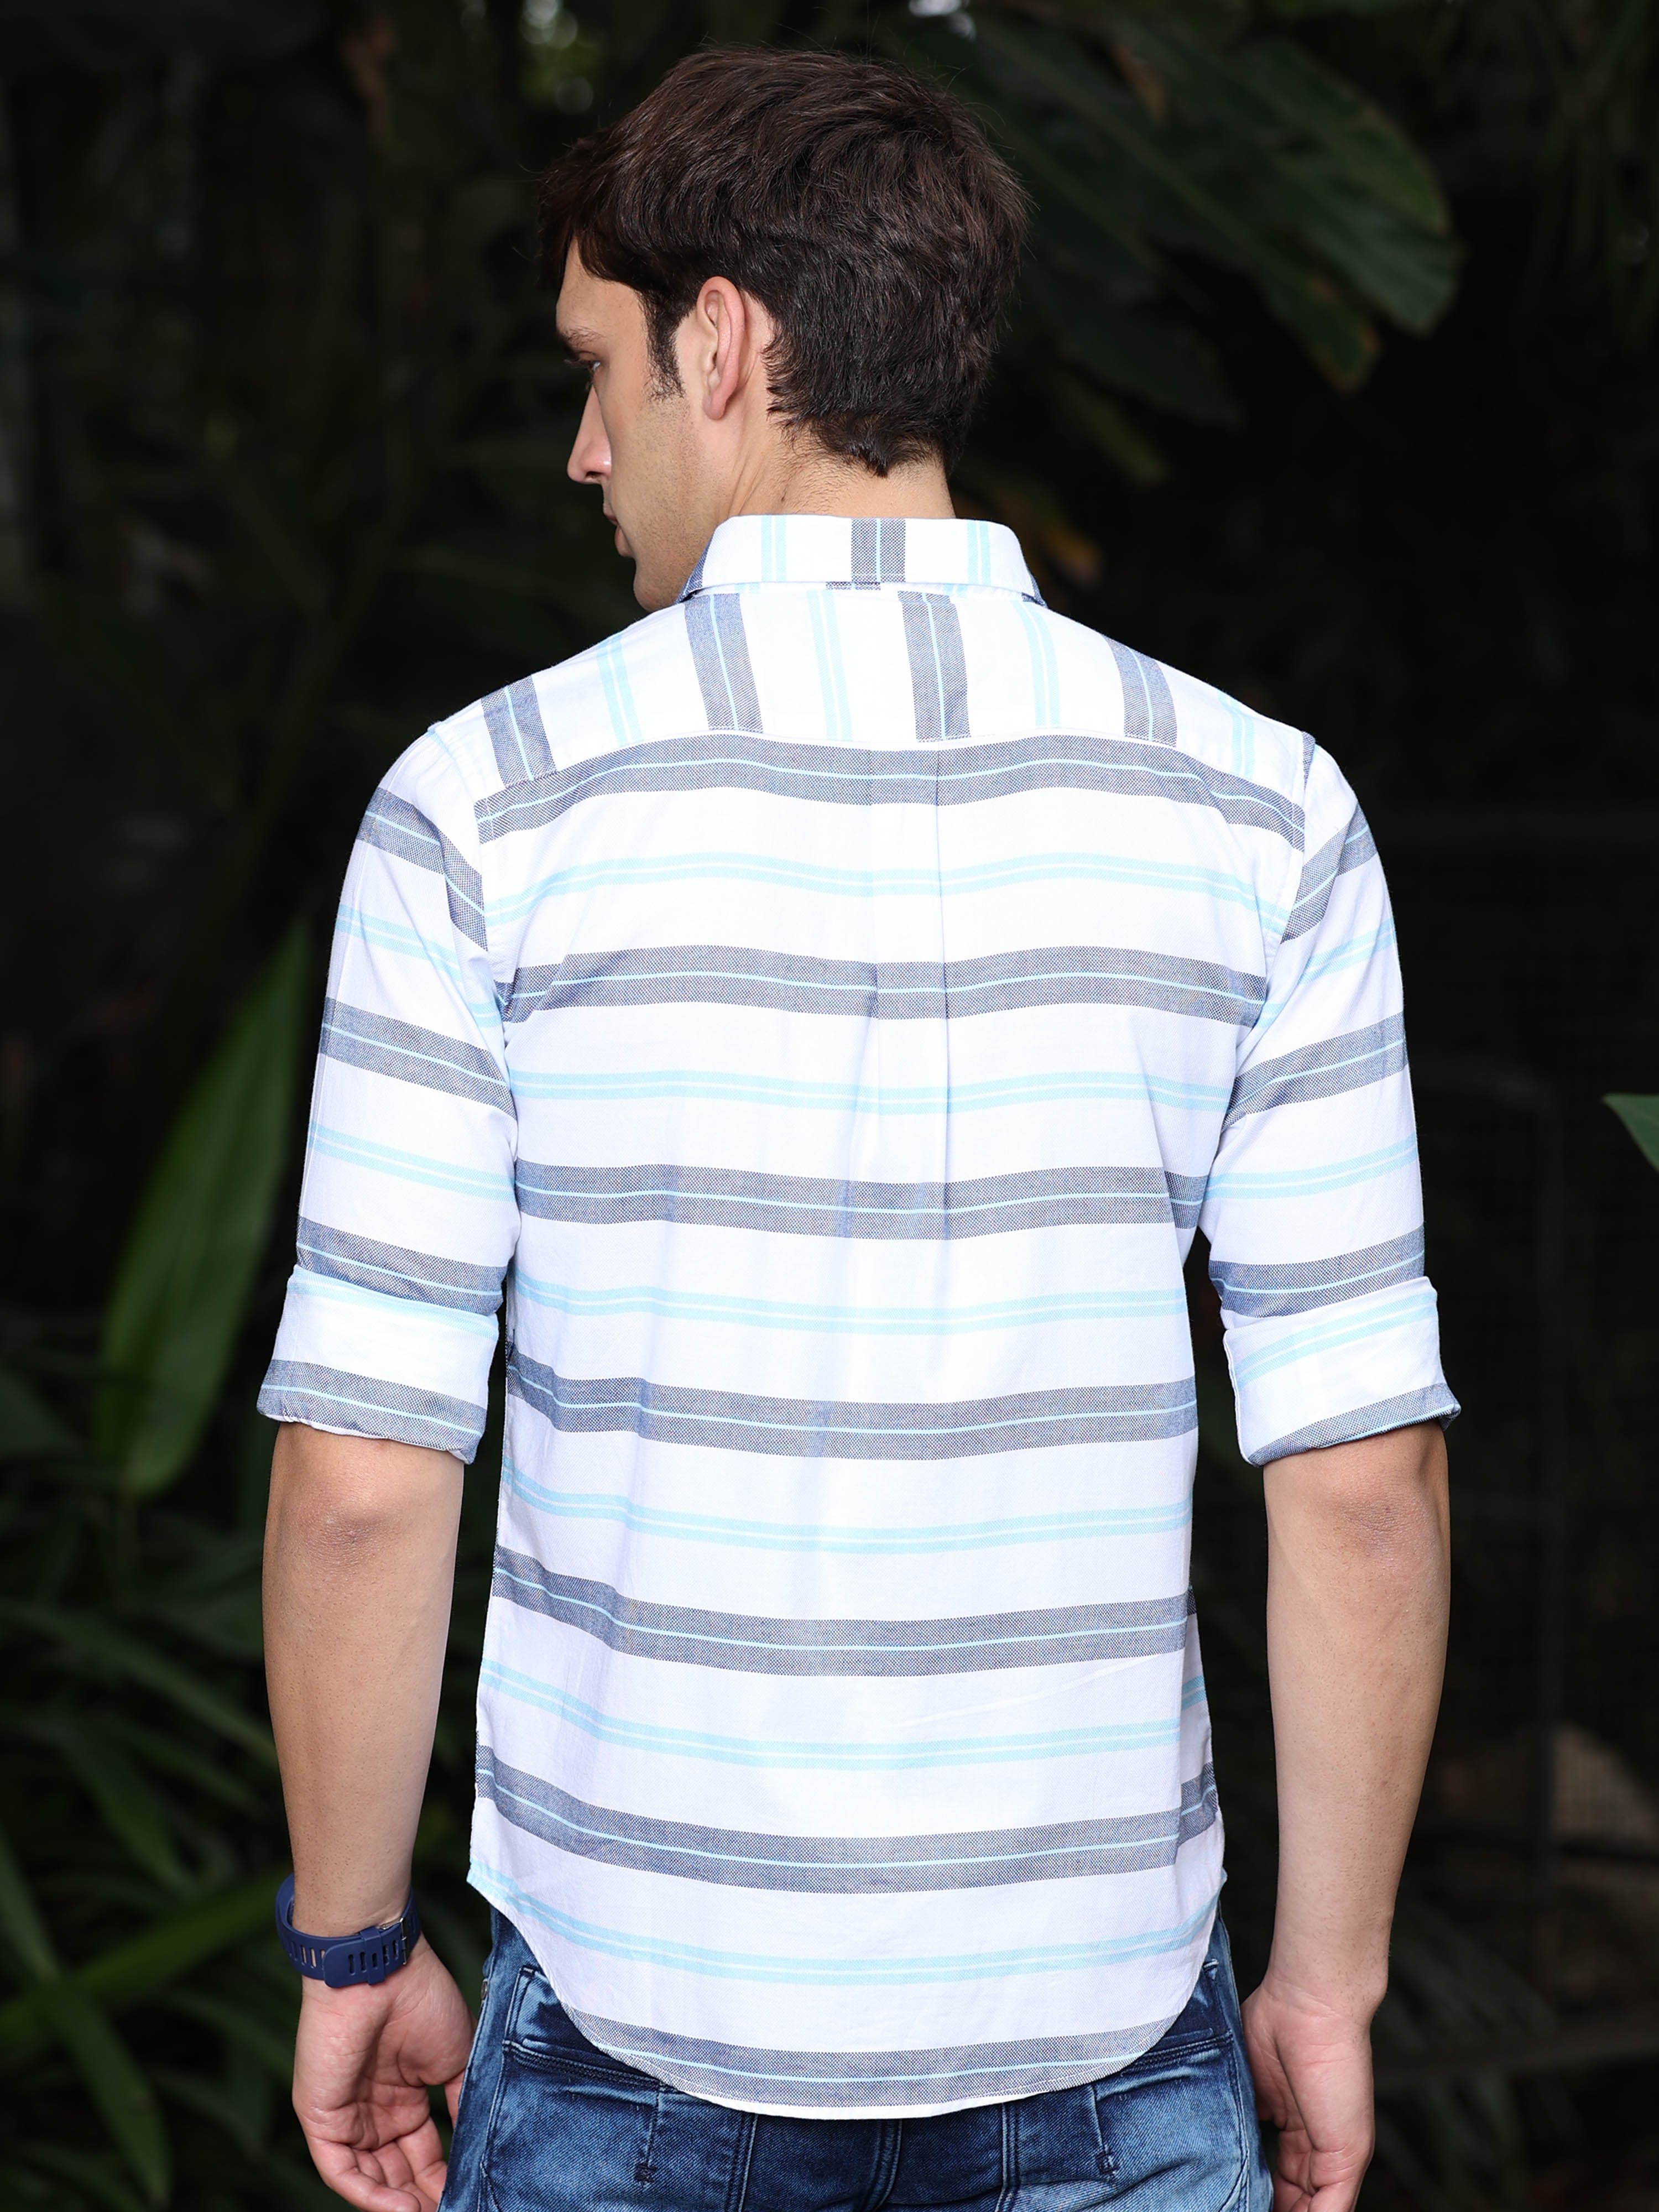 Buy Stylish Premium Broad Men's Striped Casual Shirt OnlineRs. 1399.00